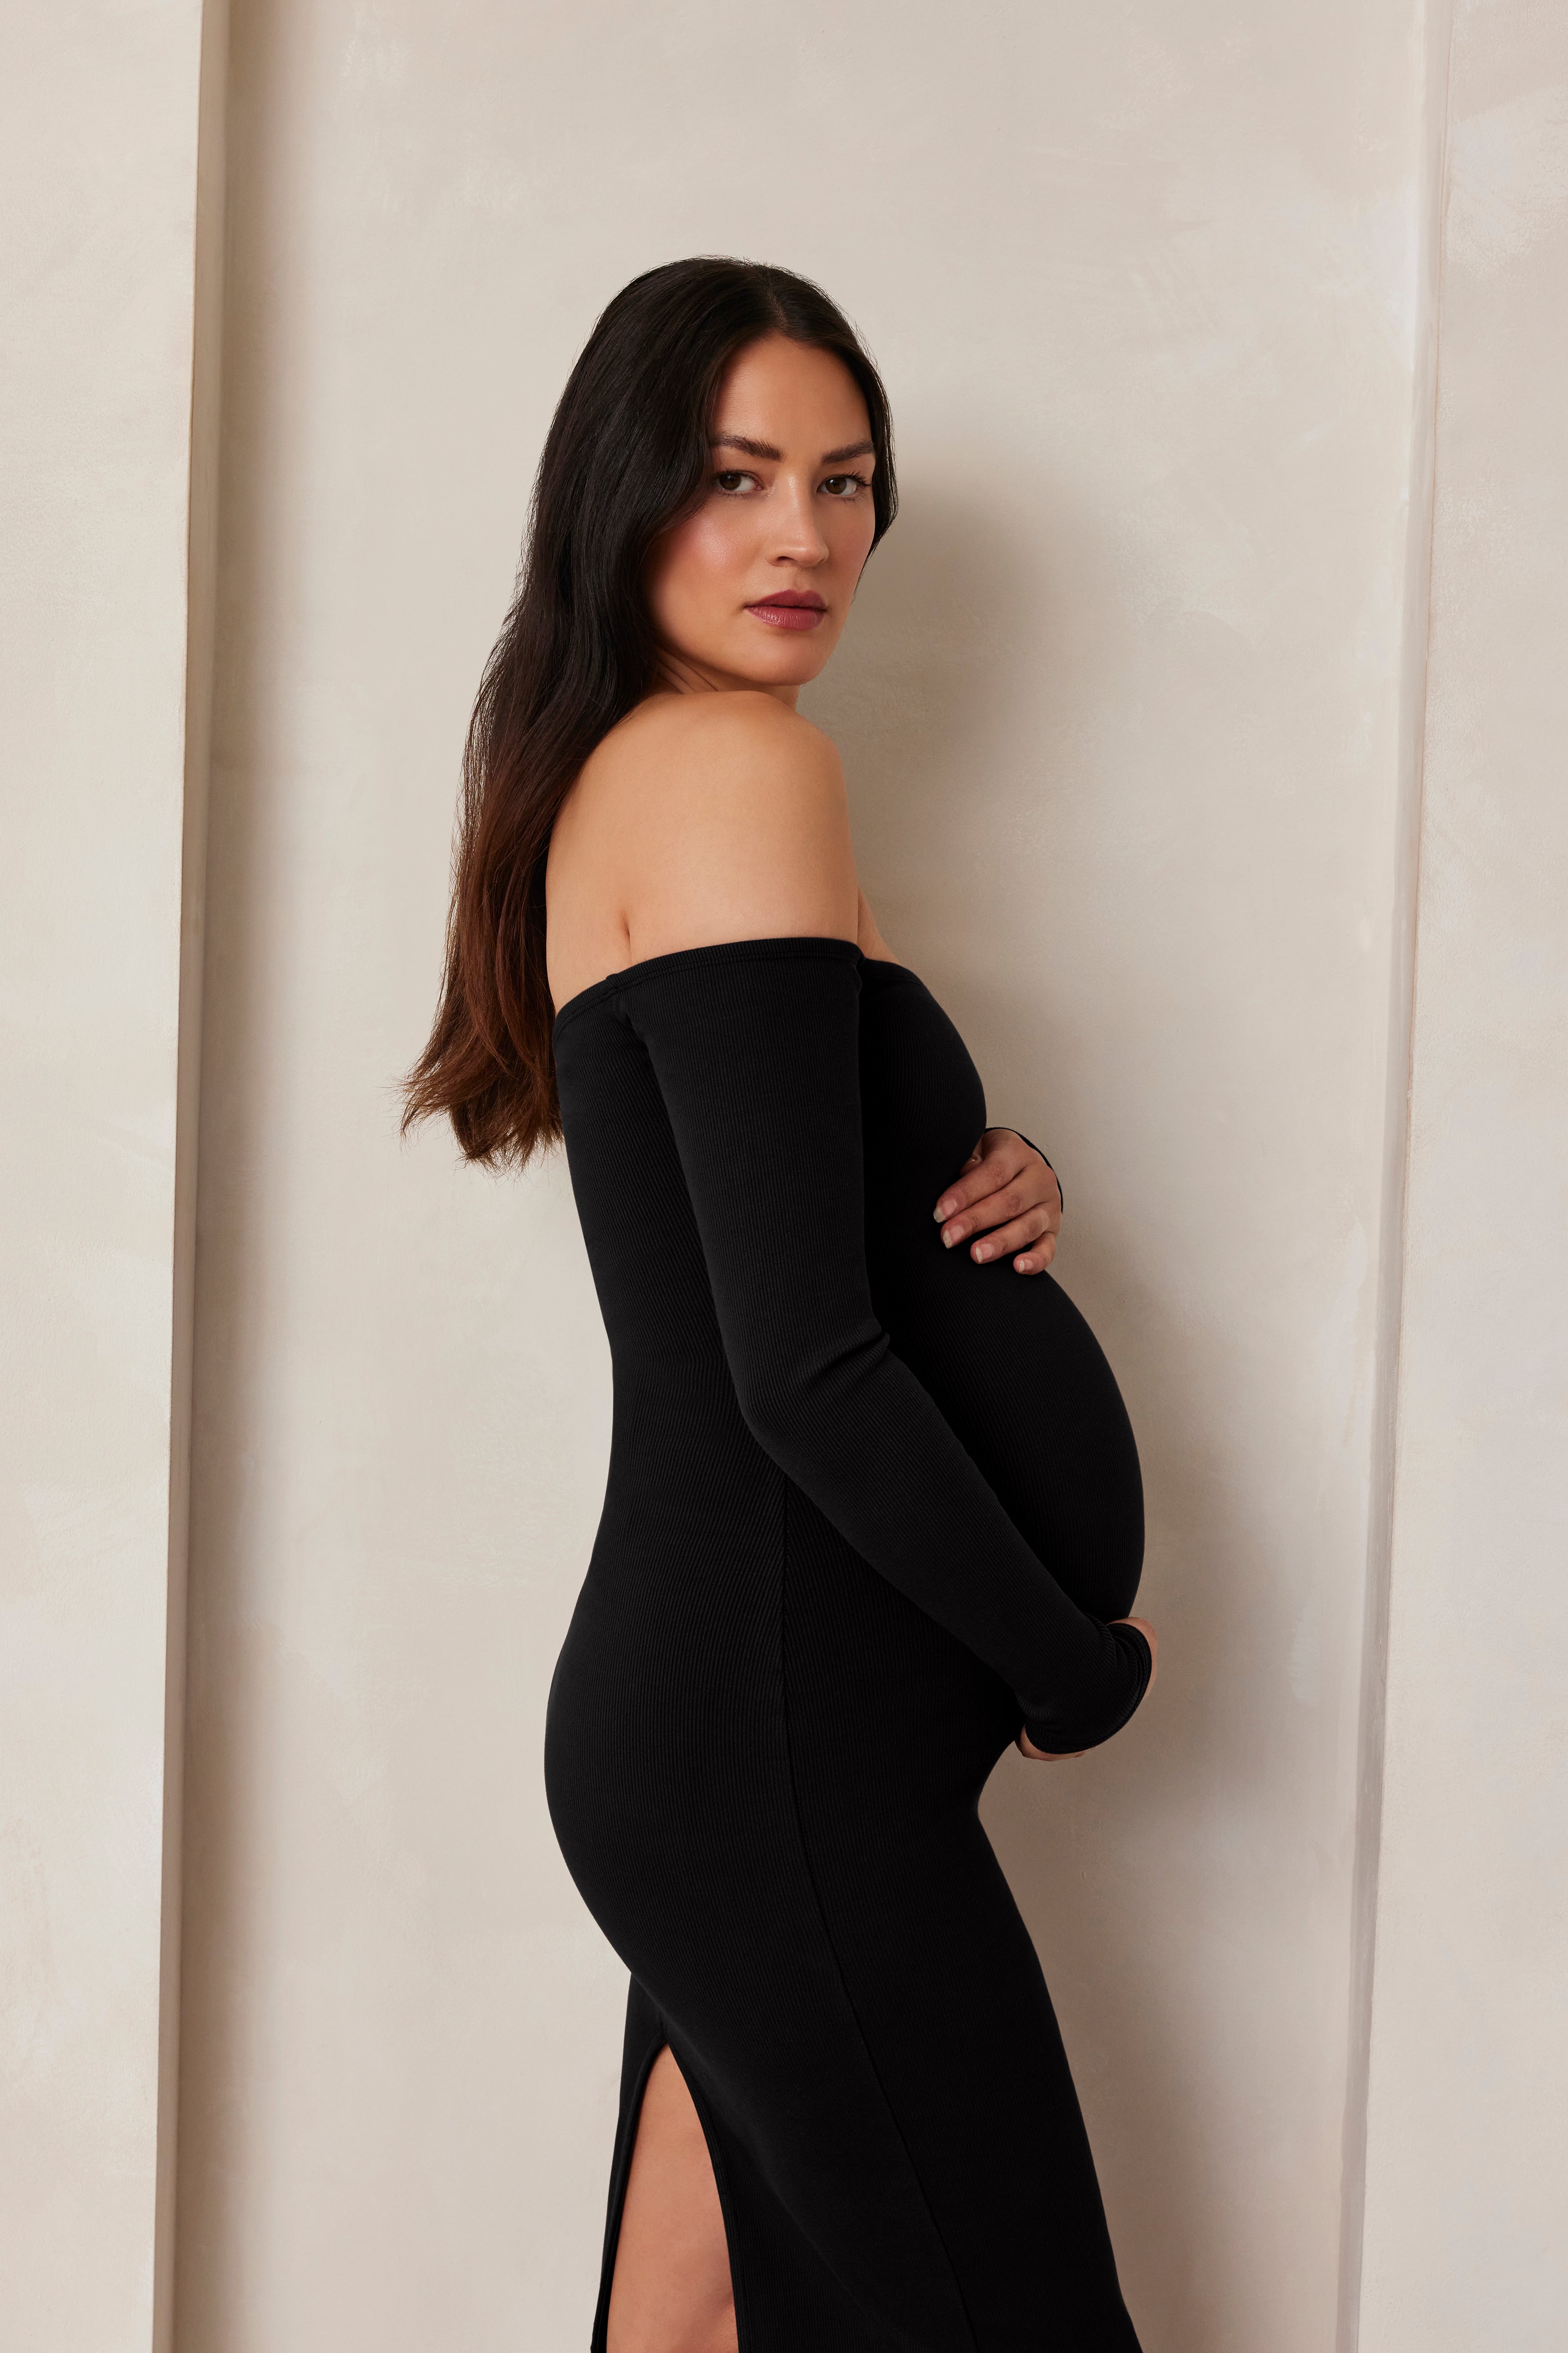 Top more than 266 maternity suit latest